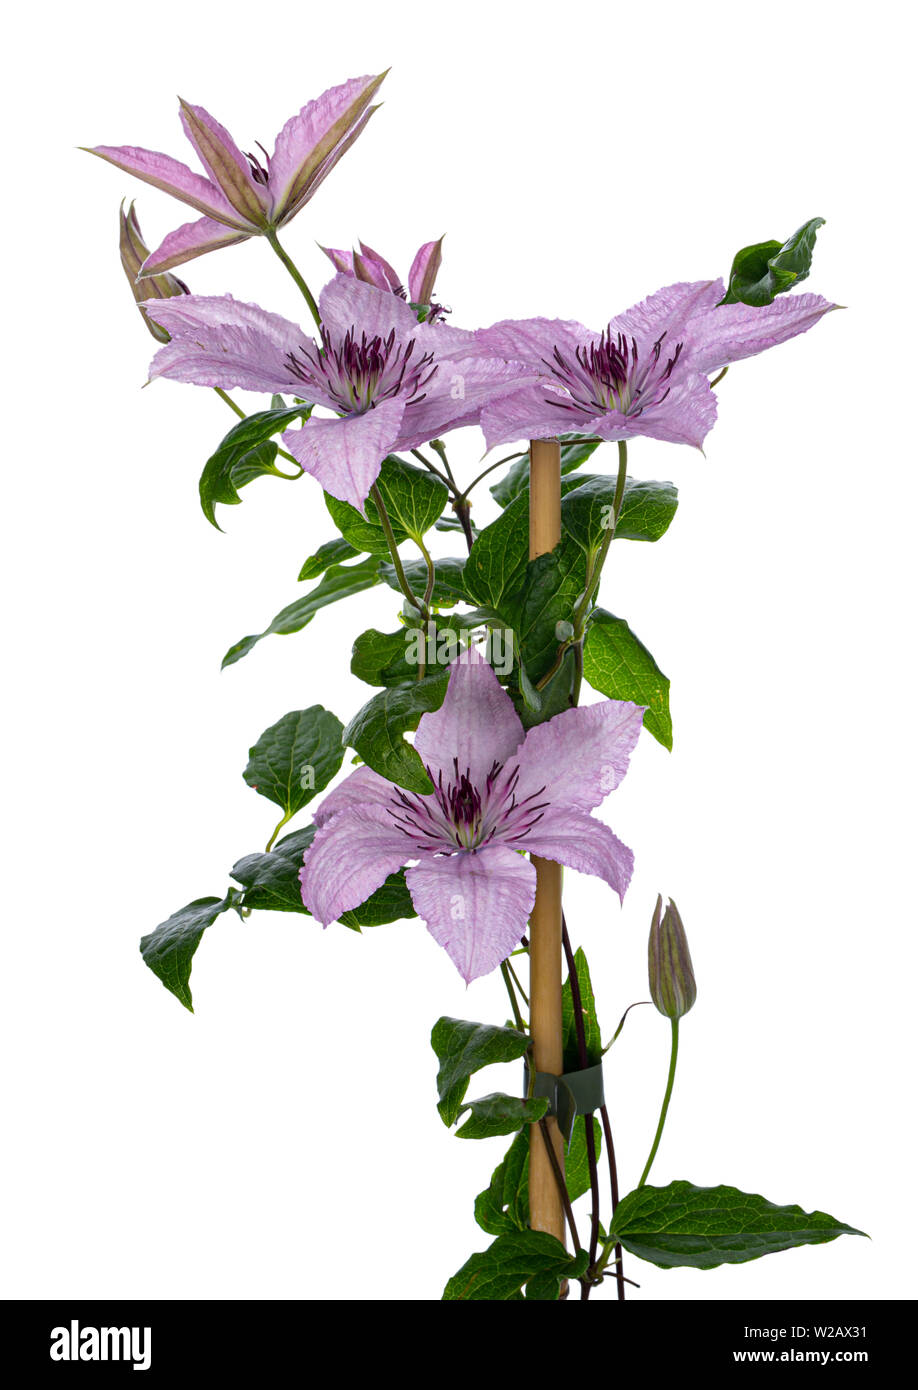 Climbing lilac / pink blooming Clematis Hagley Hybrid flowers on branch with leafs. Isolated on white background. Stock Photo